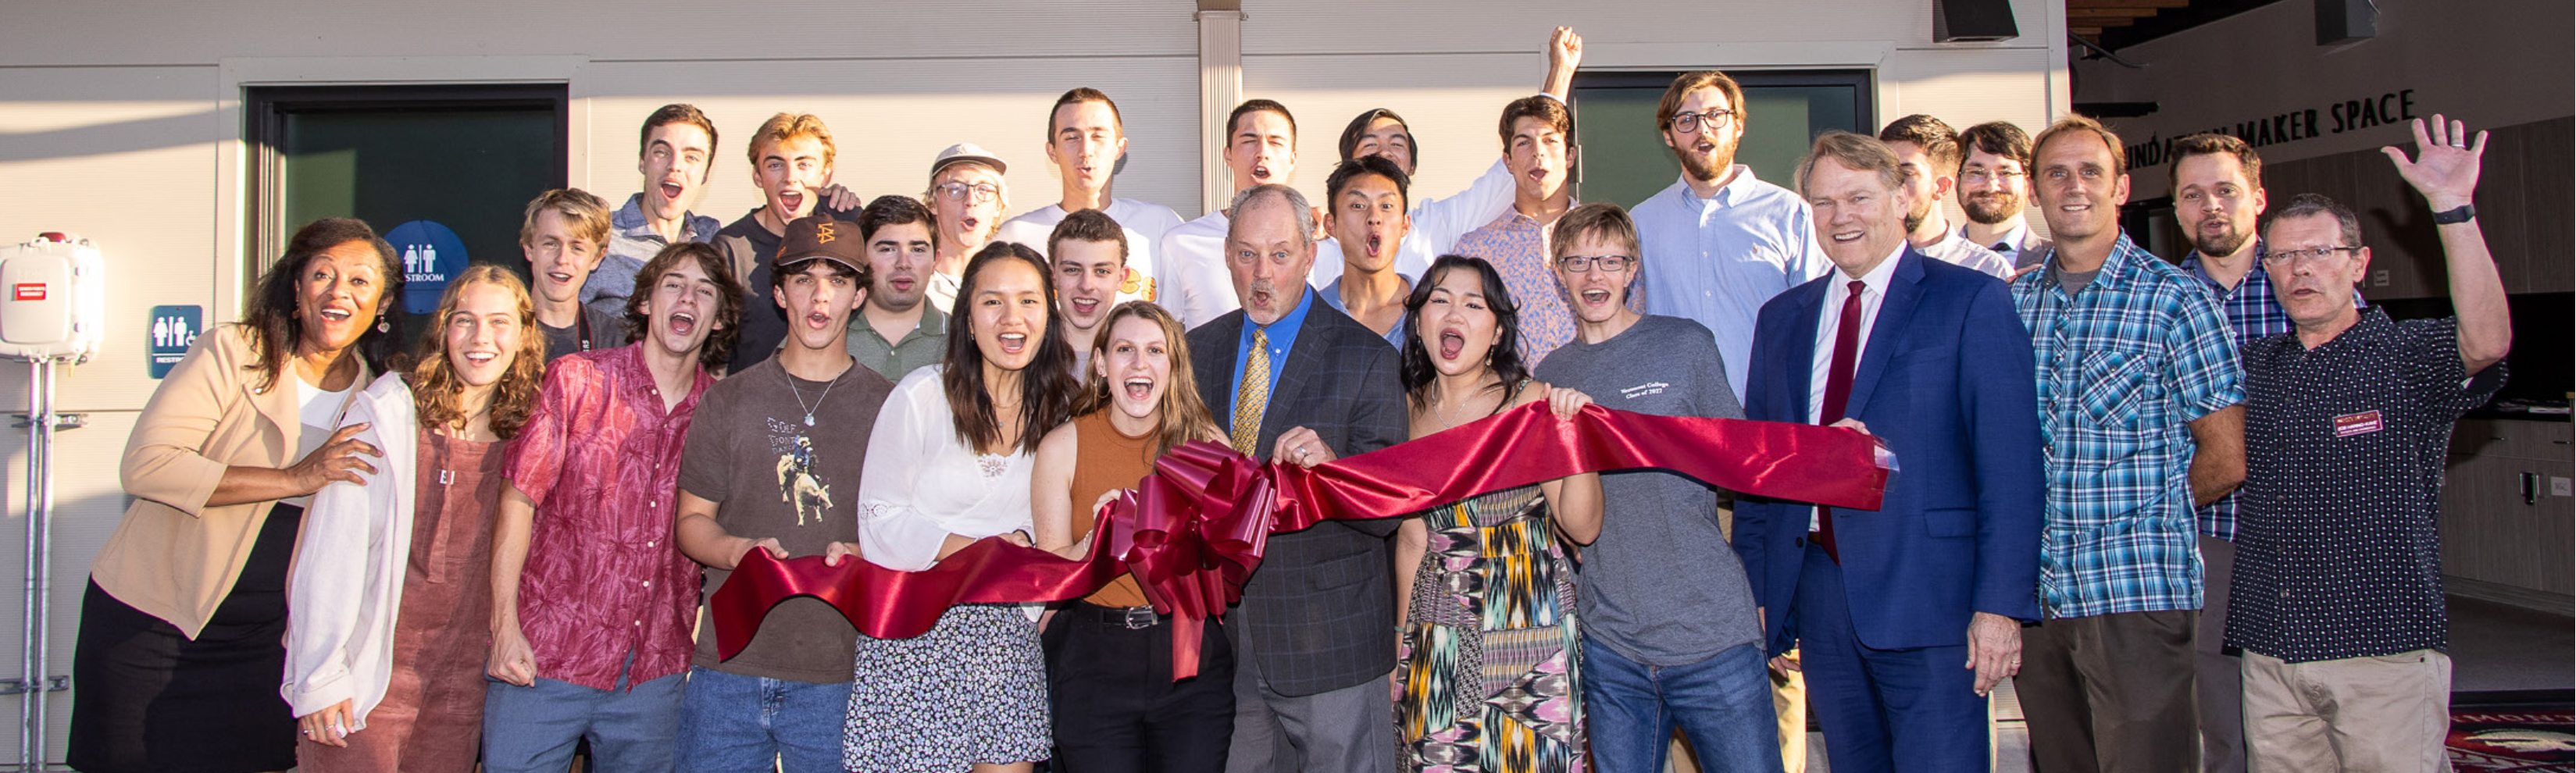 Students, staff, faculty celebrate Engineering ribbon cutting